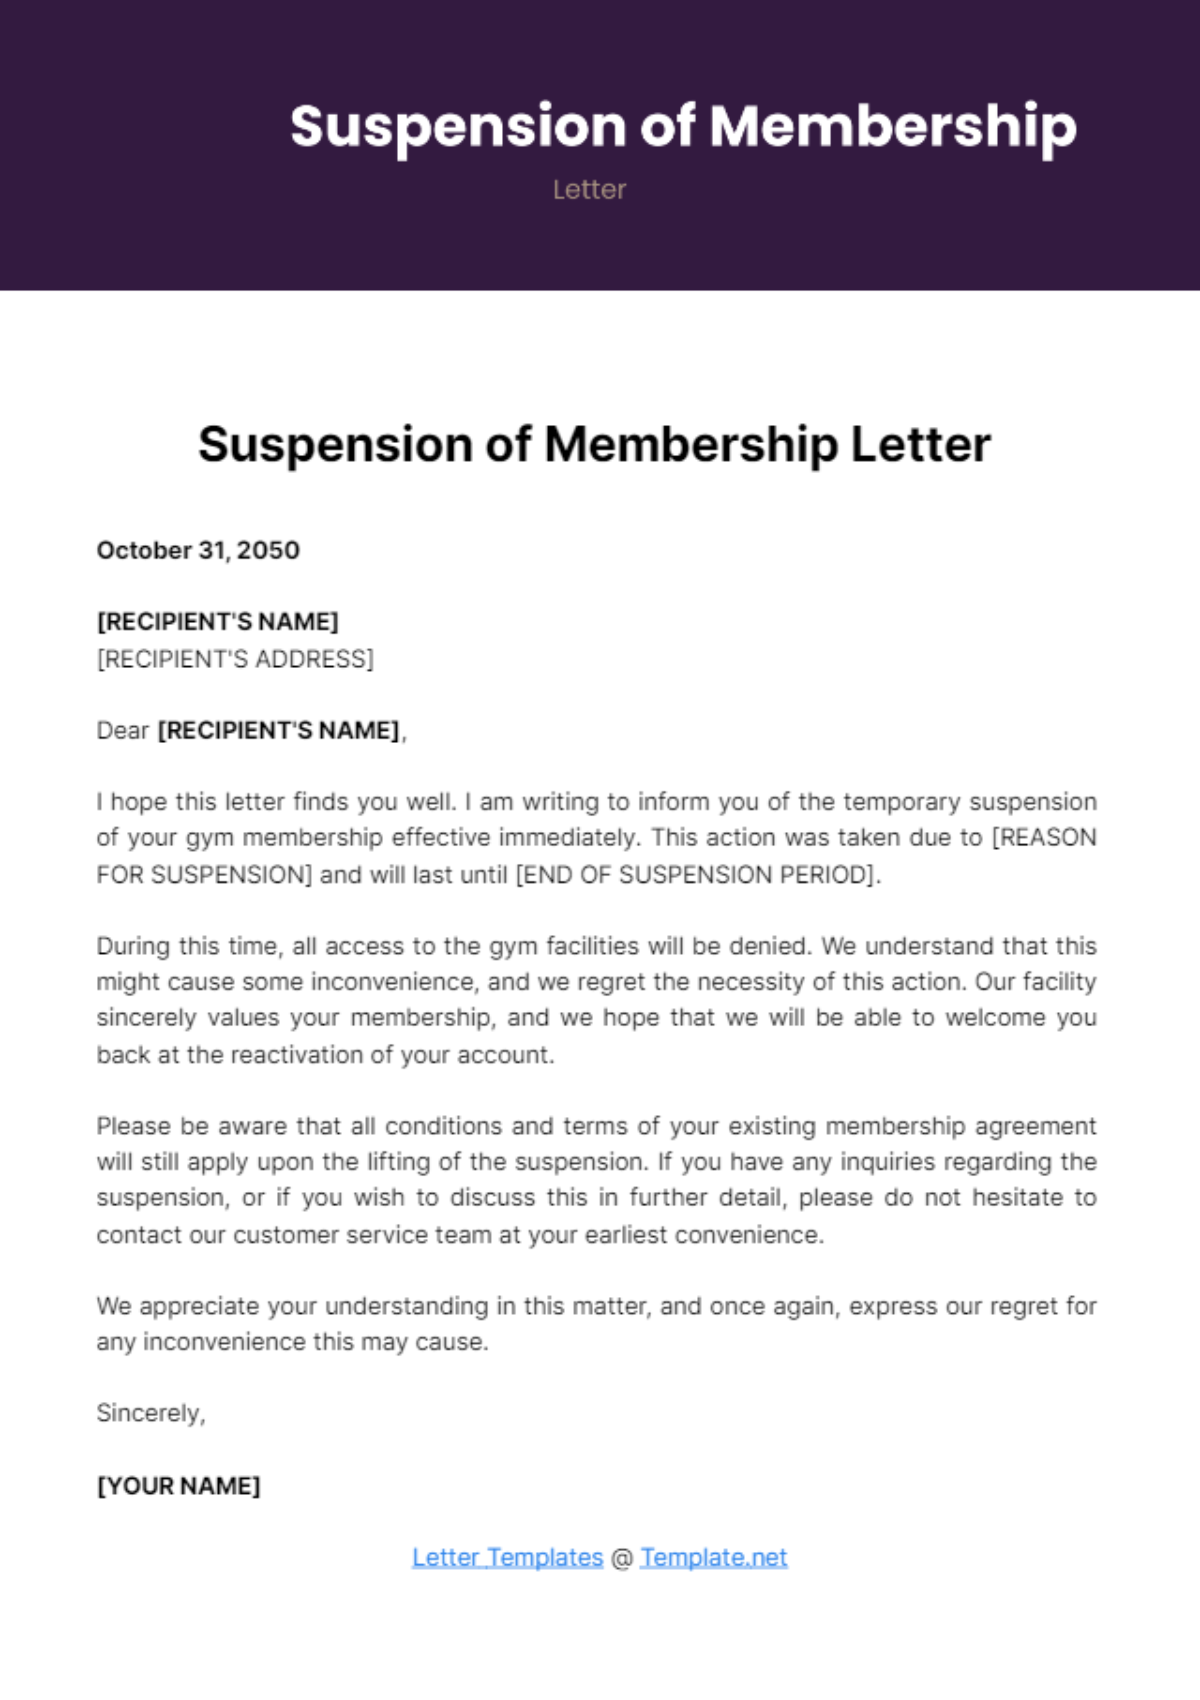 Free Suspension of Membership Letter Template